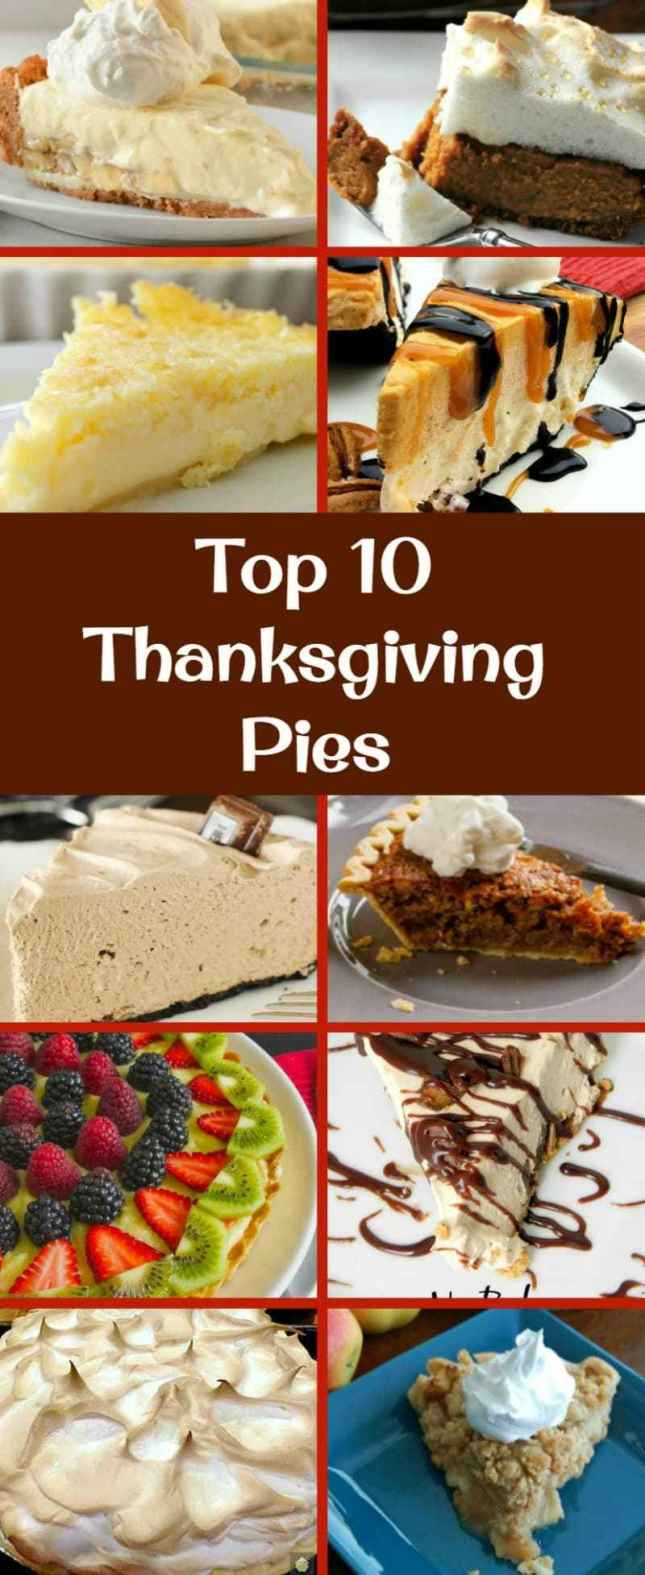 Top Thanksgiving Pies
 The BEST Top 10 Thanksgiving Pies – Lovefoo s